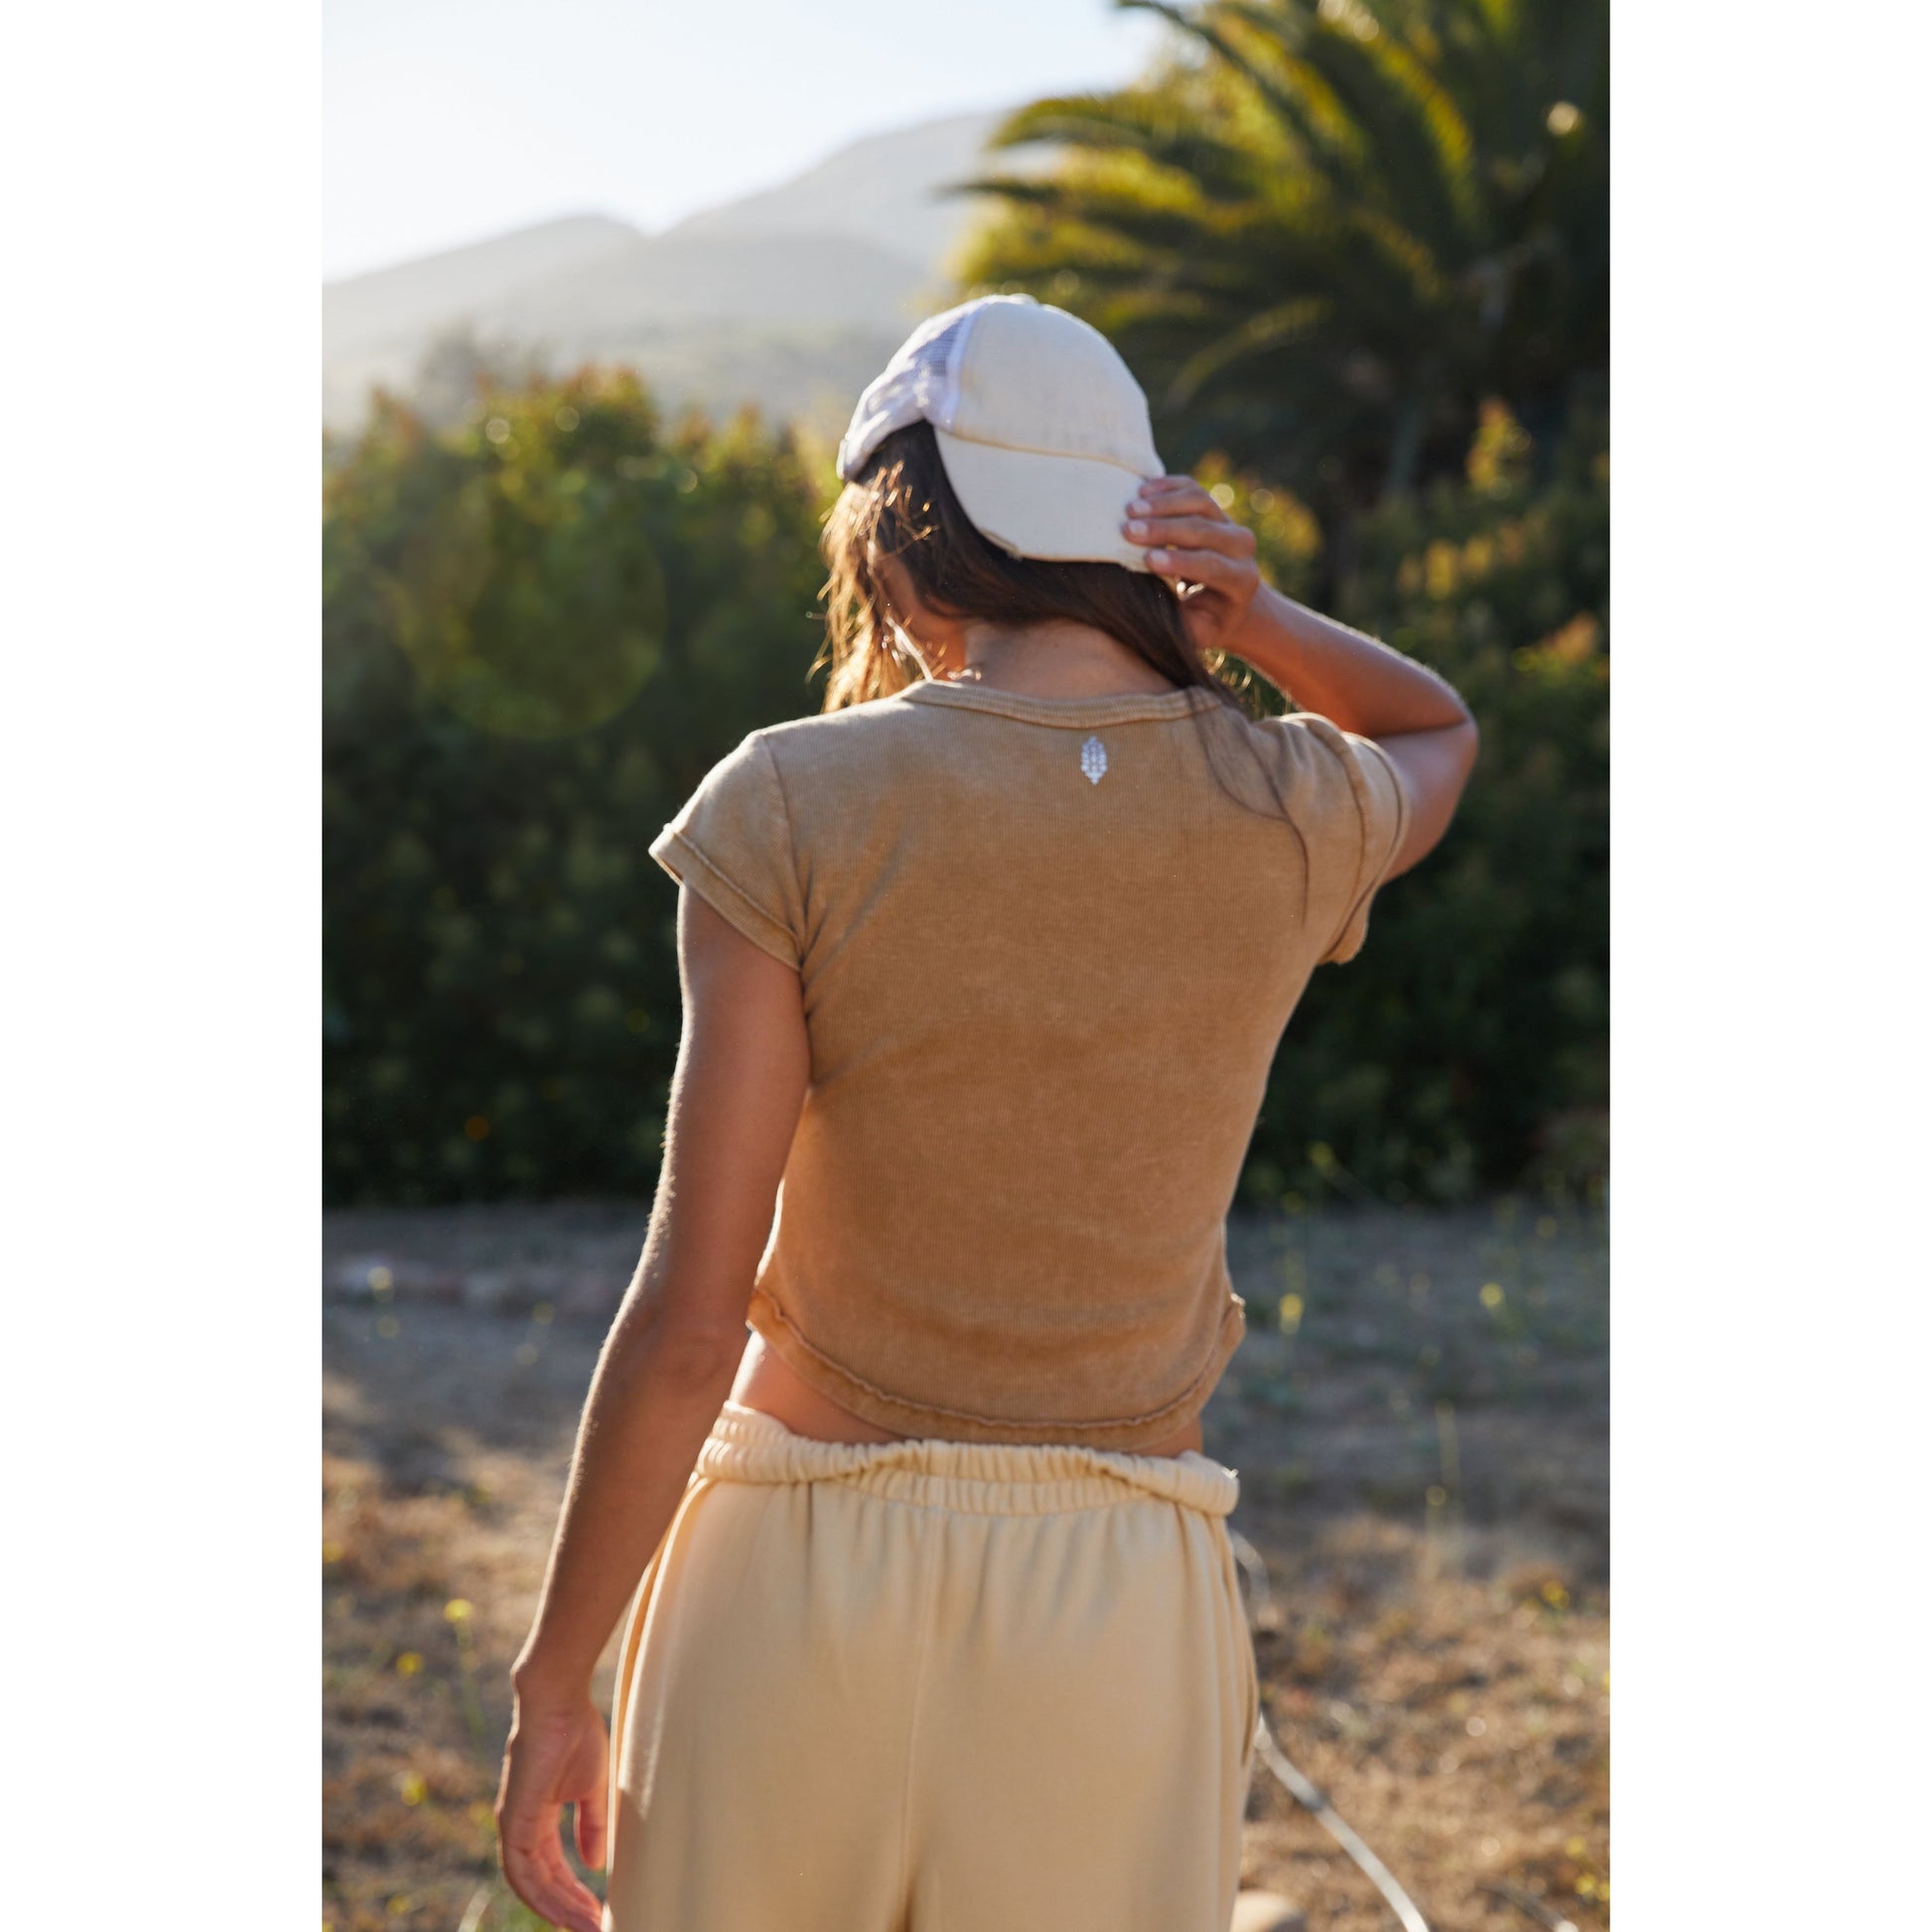 A woman in a beige Ribbed Baby Tee by Free People Movement and white hat stands outdoors, facing away from the camera, with mountains and palms in the background.